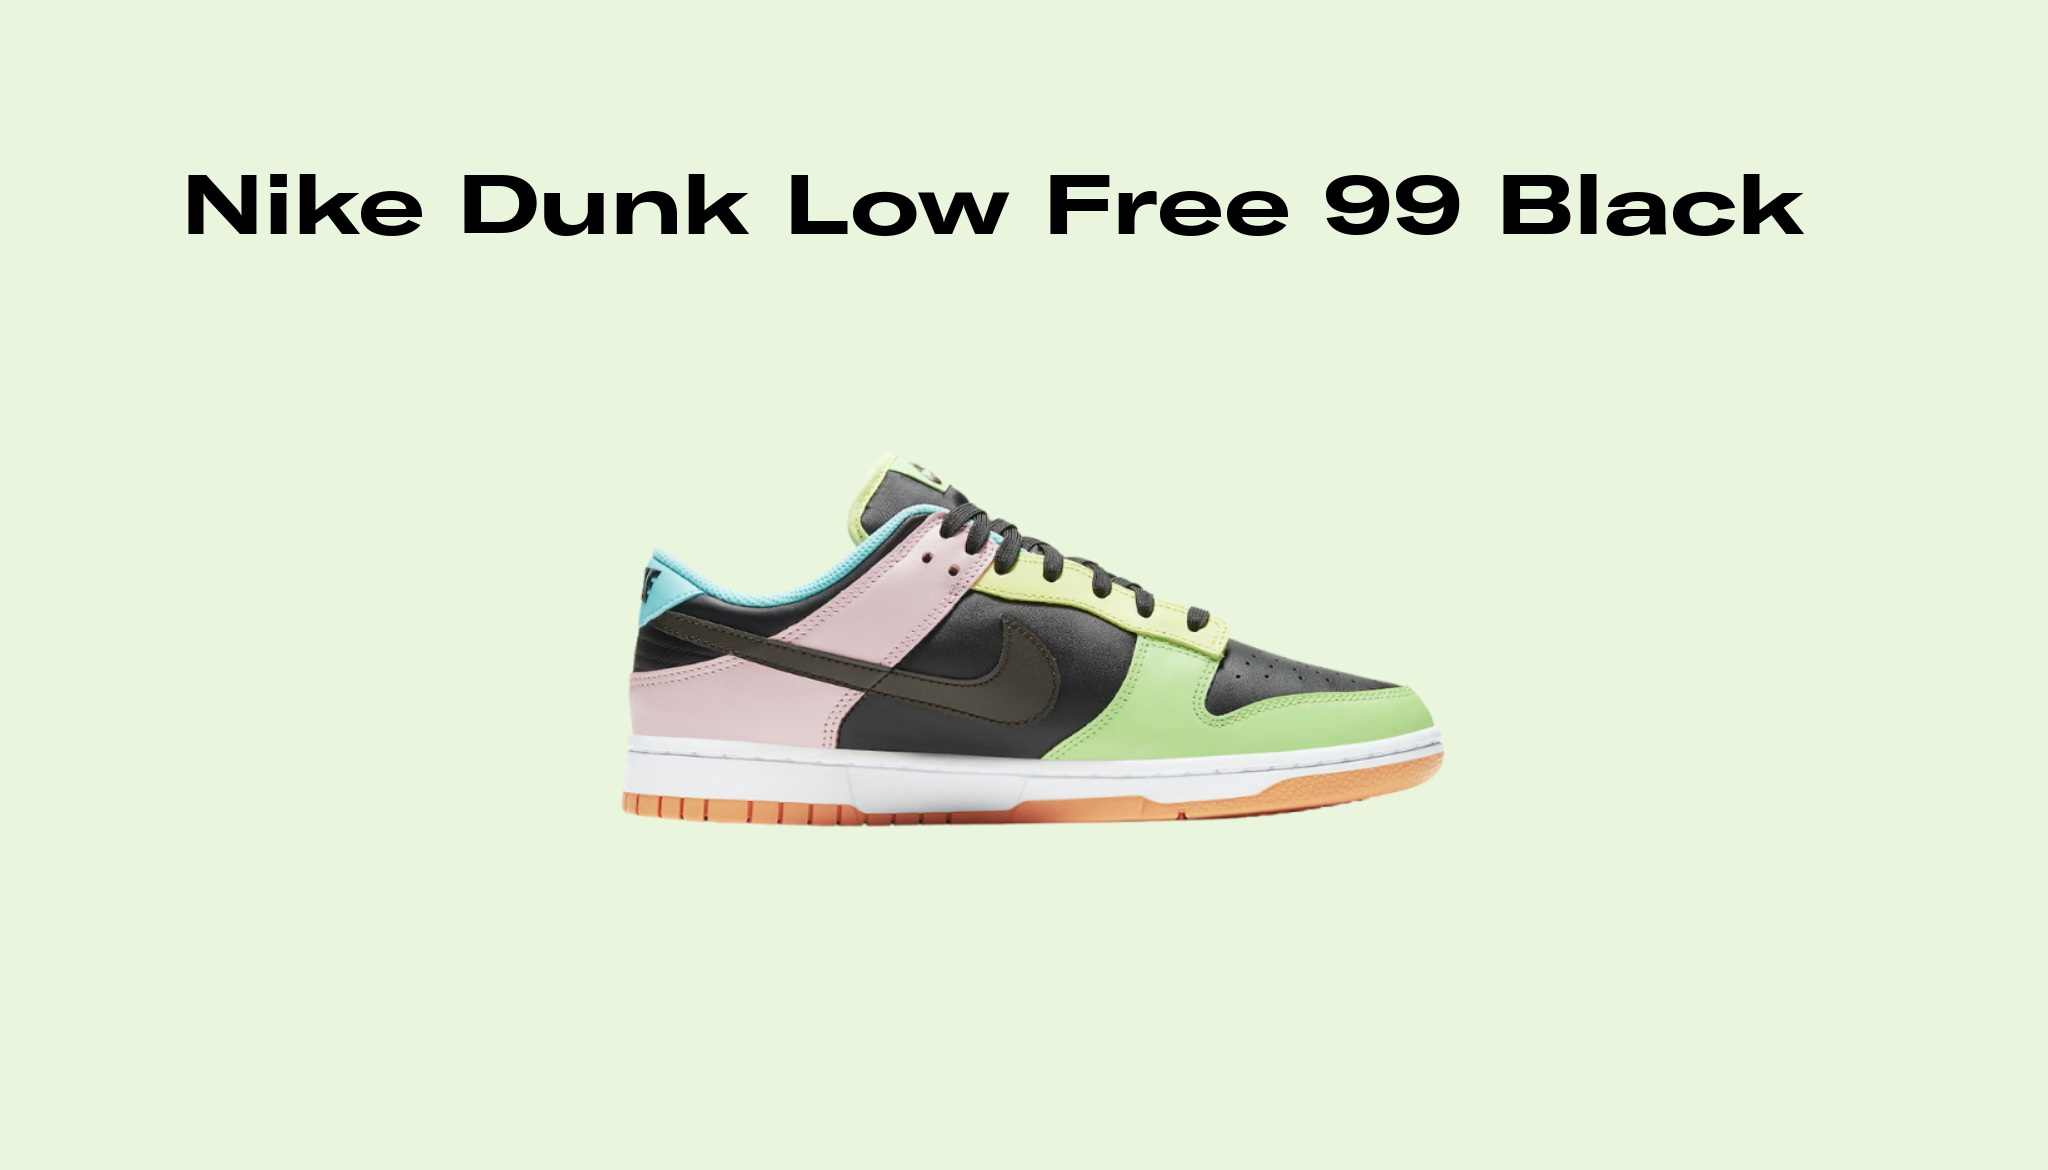 Nike Dunk Low Free 99 Black, Raffles and Release Date | Sole Retriever